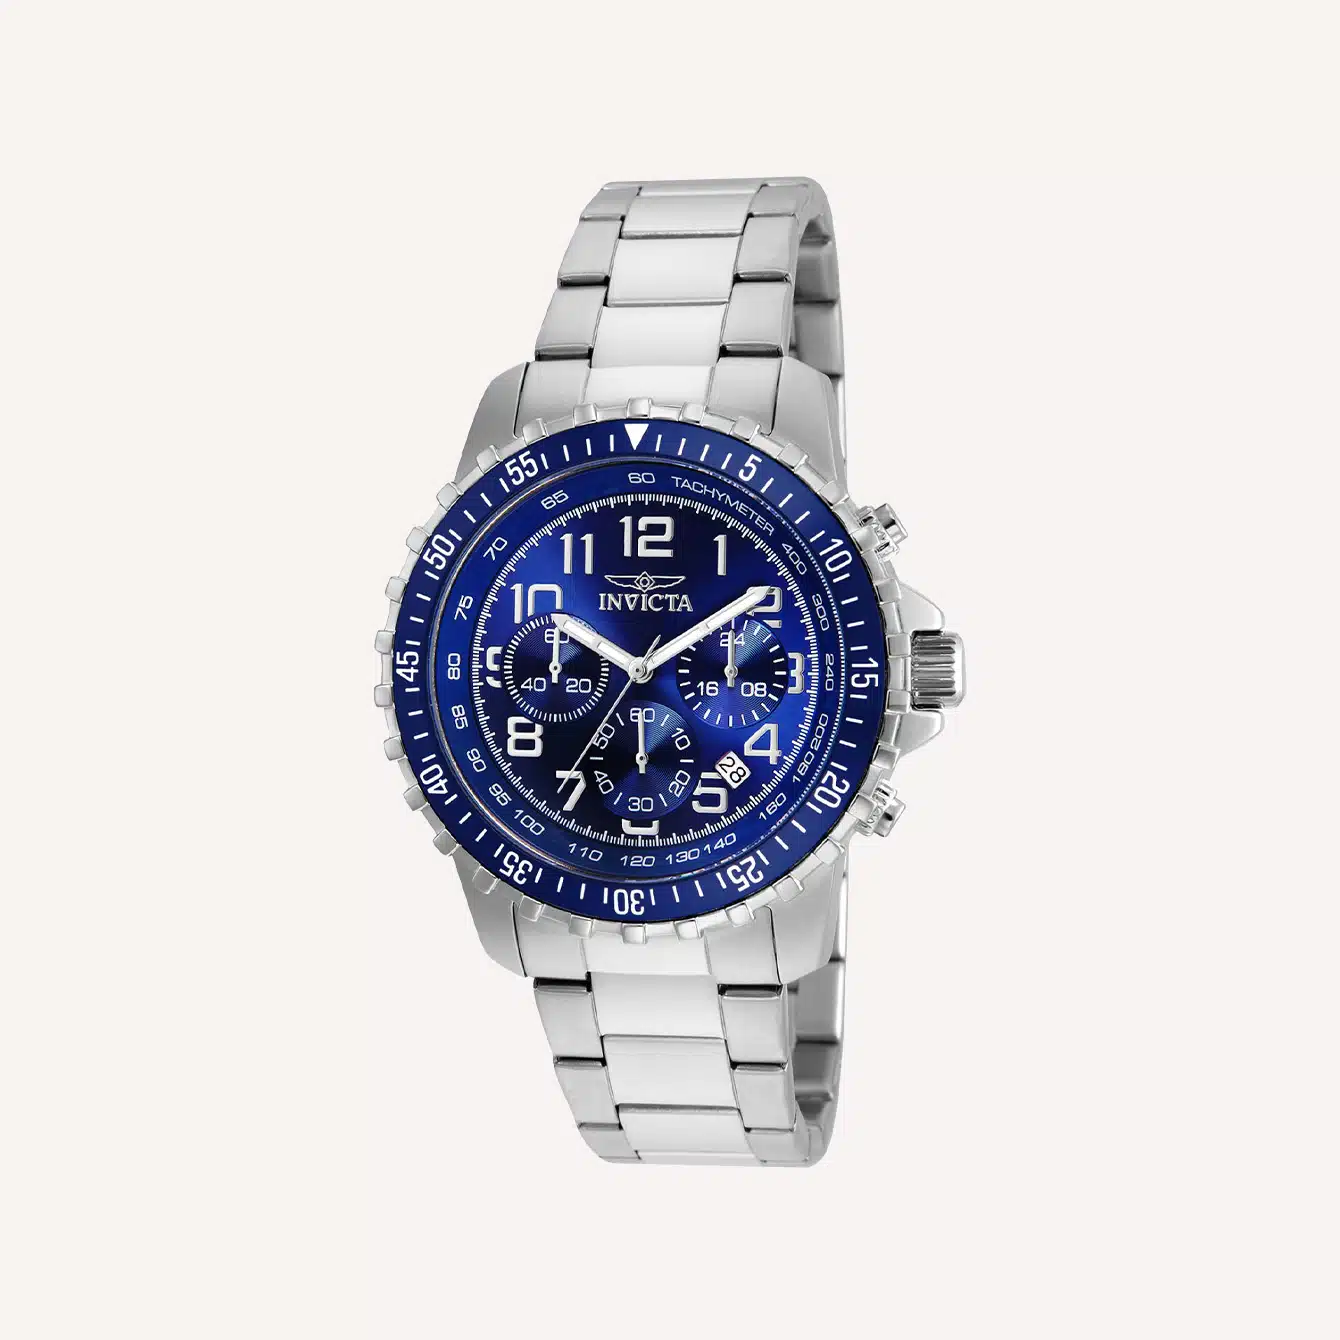 12 Best Invicta Watches (Invicta Watch Buying Guide)-4